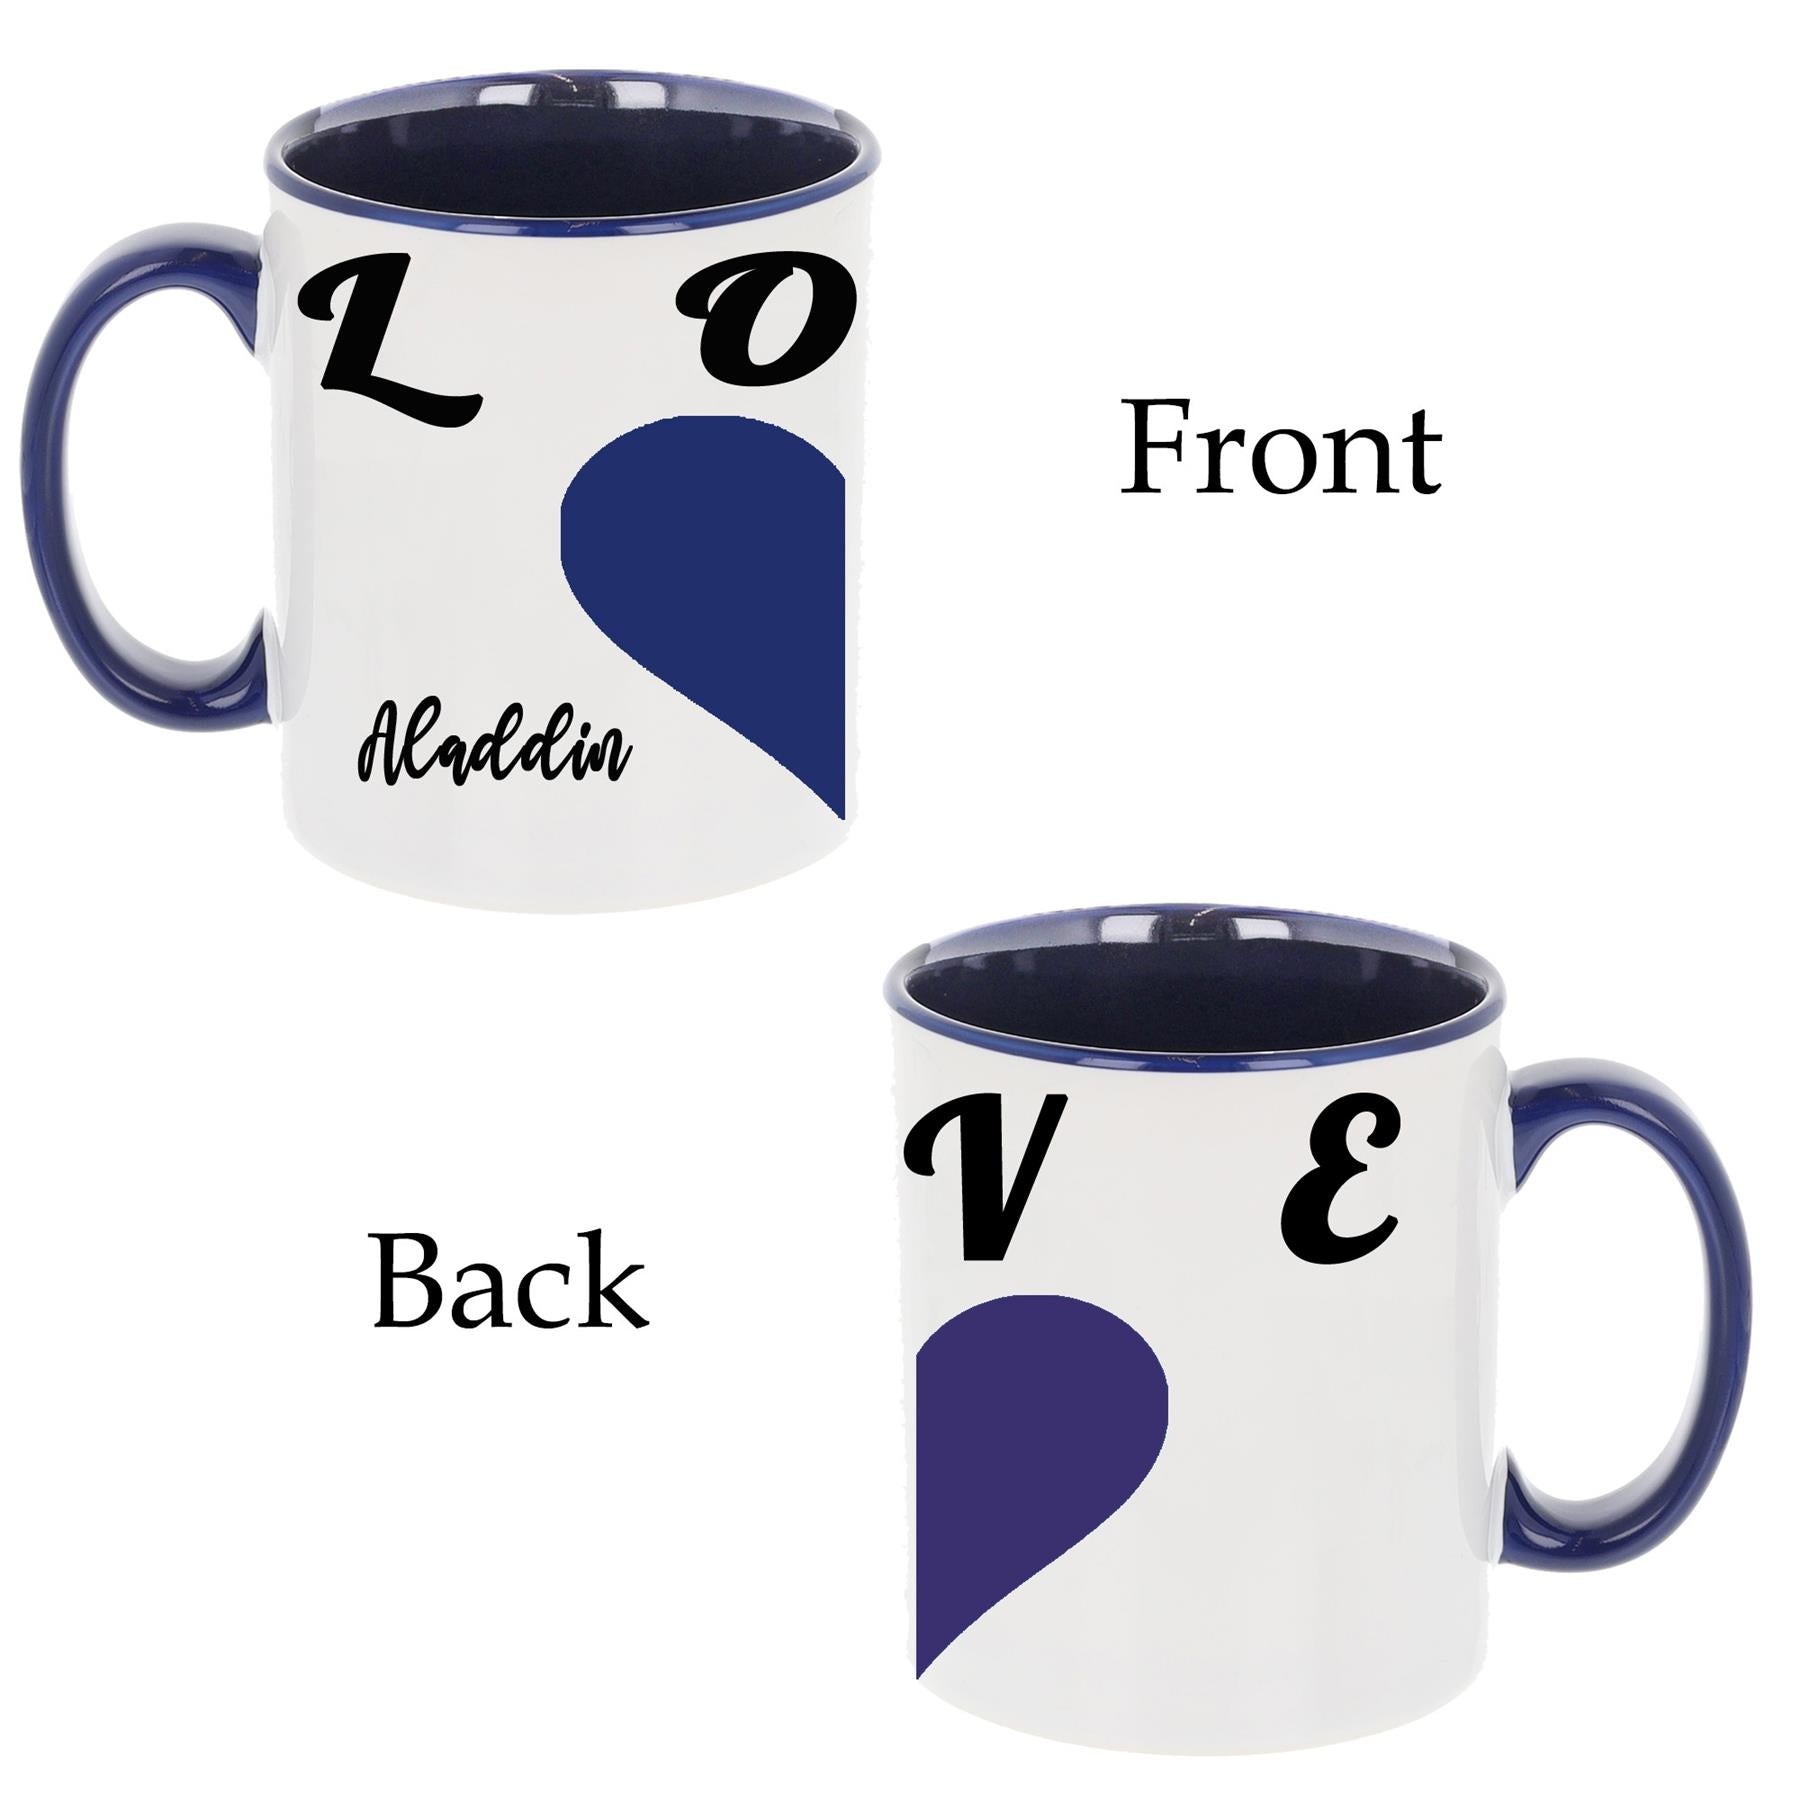 Personalised Couples Matching Heart Filled Mug Set  - Always Looking Good - His & His Empty  